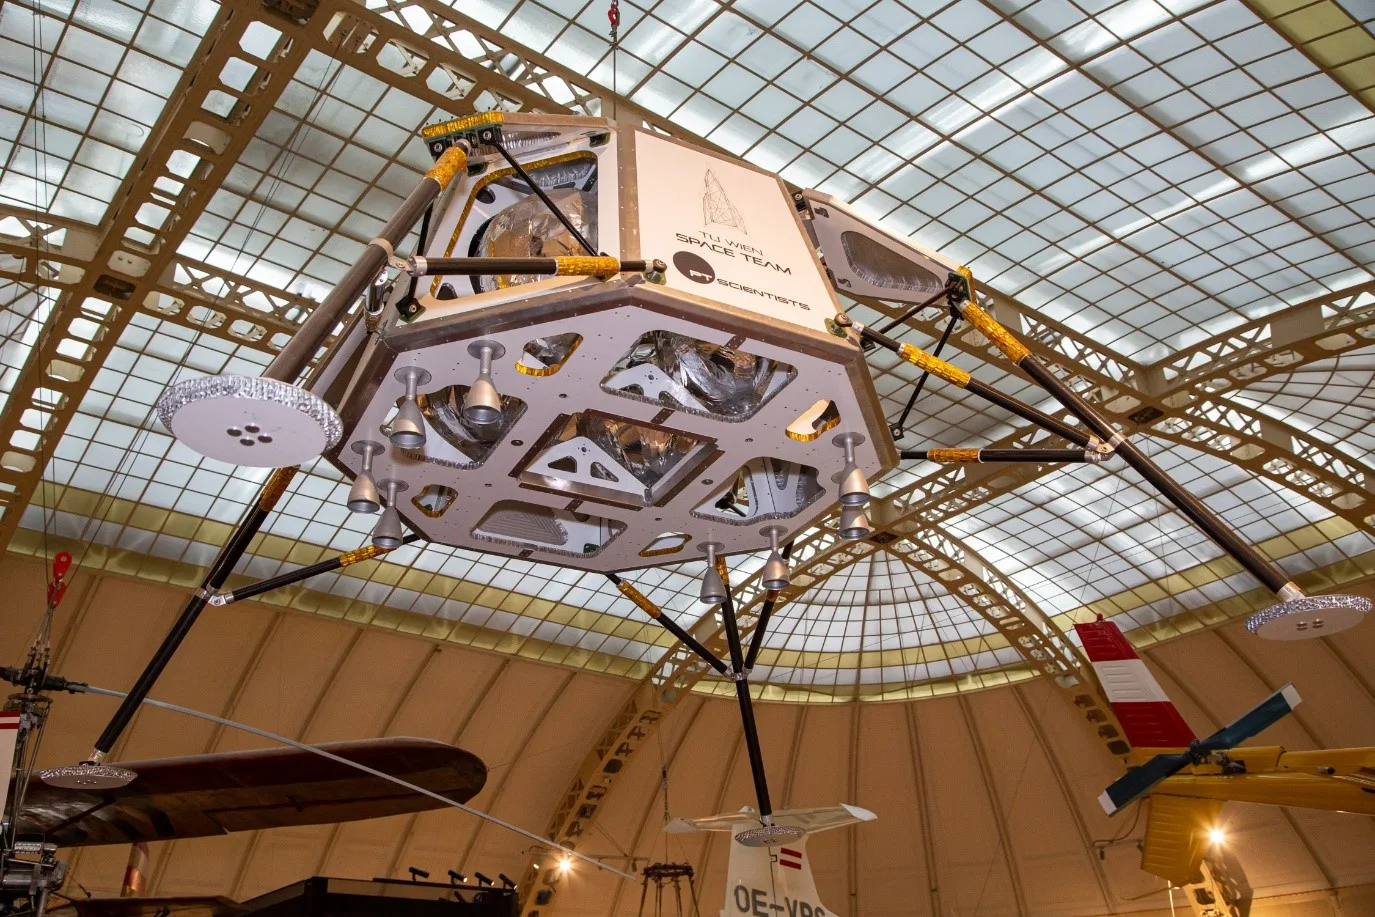 Moon landing module built by the TU Wien Space Team exhibited at the Technical Museum in Vienna